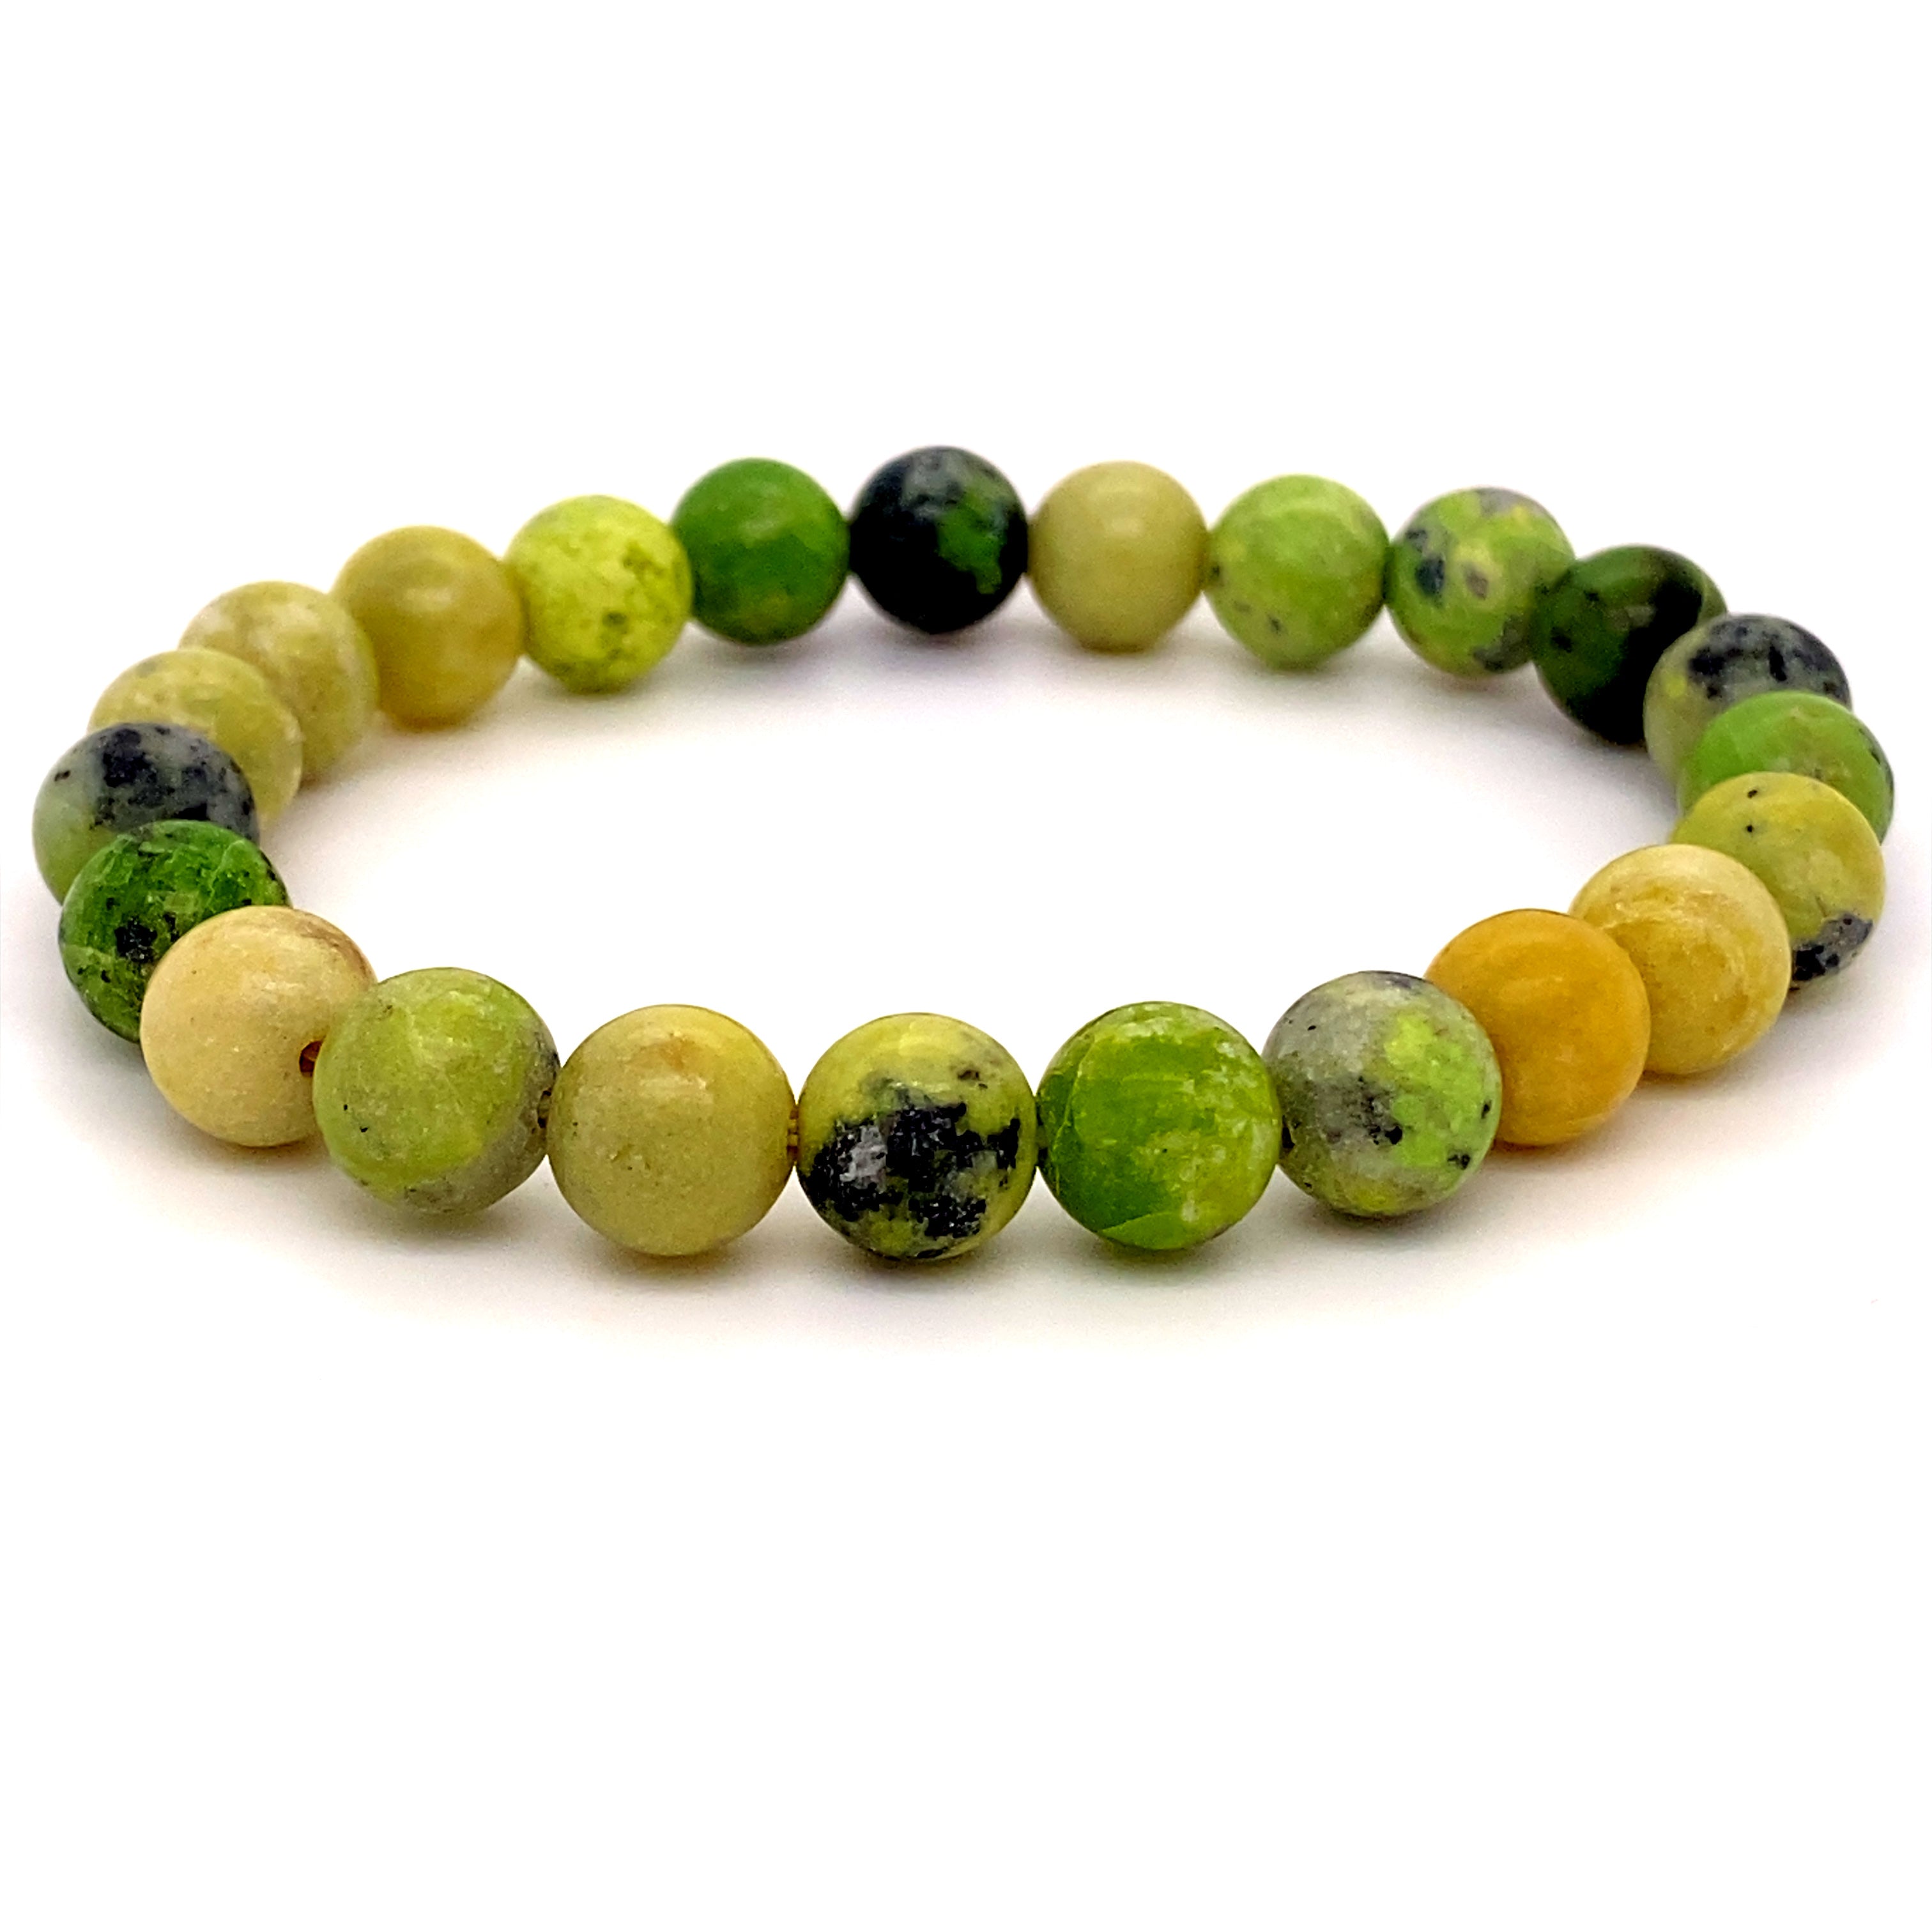 Buy Certified Green Aventurine Bracelet for Heart Chakra & Luck Online -  Know Price and Benefits — My Soul Mantra